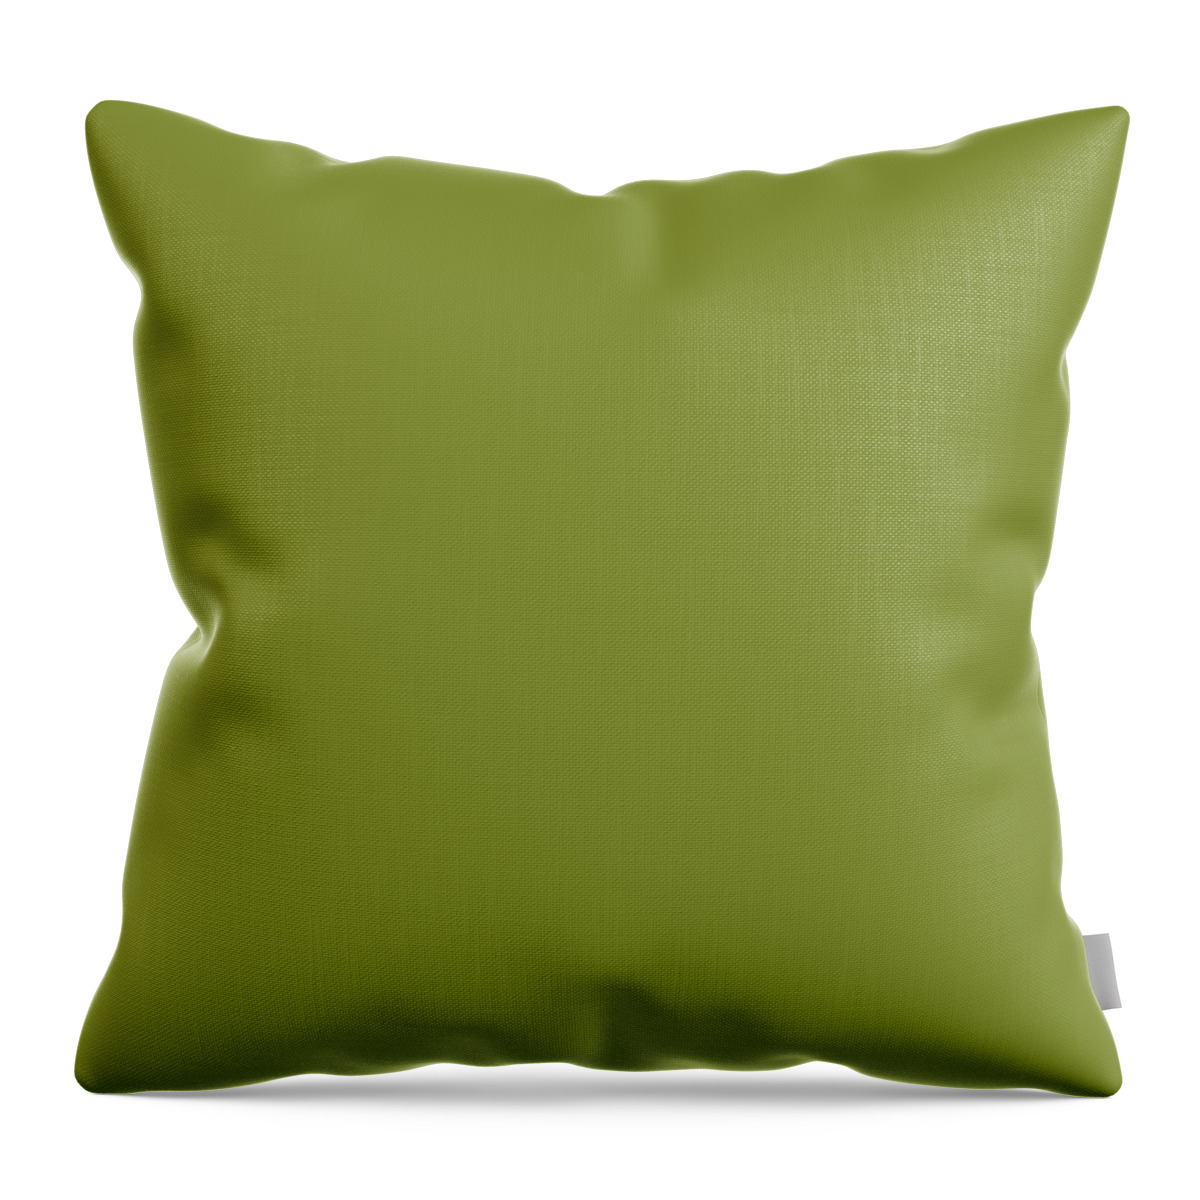 Wasabi Nuts Throw Pillow featuring the digital art Wasabi Nuts by TintoDesigns